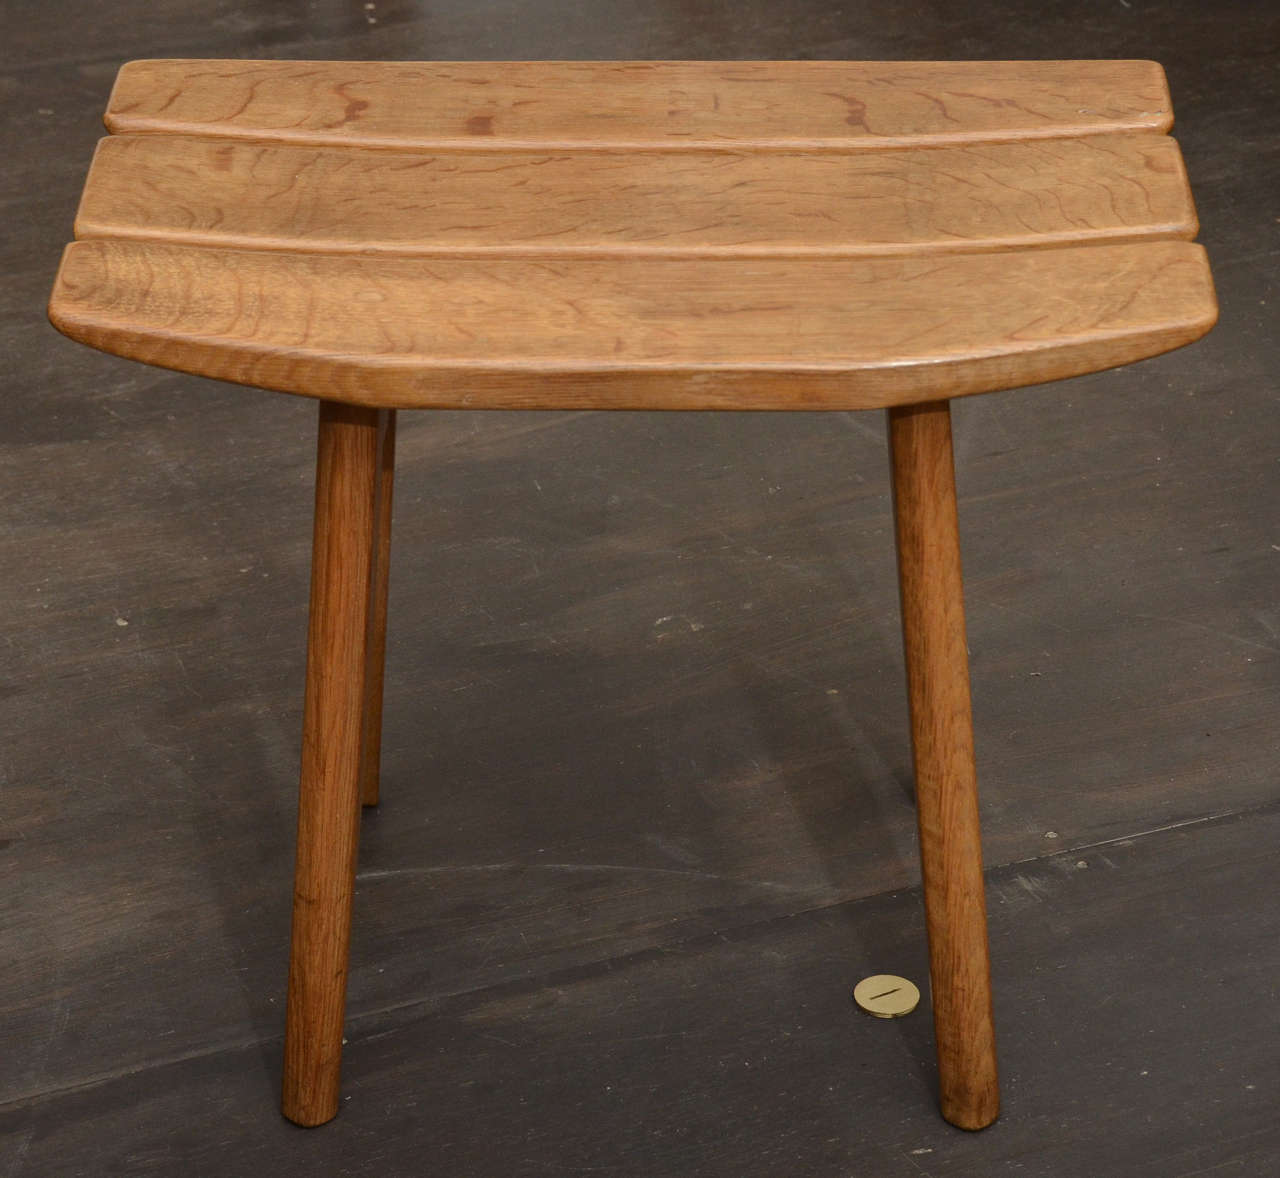 Oak stool with slatted seat by Guillerme et Chambron.